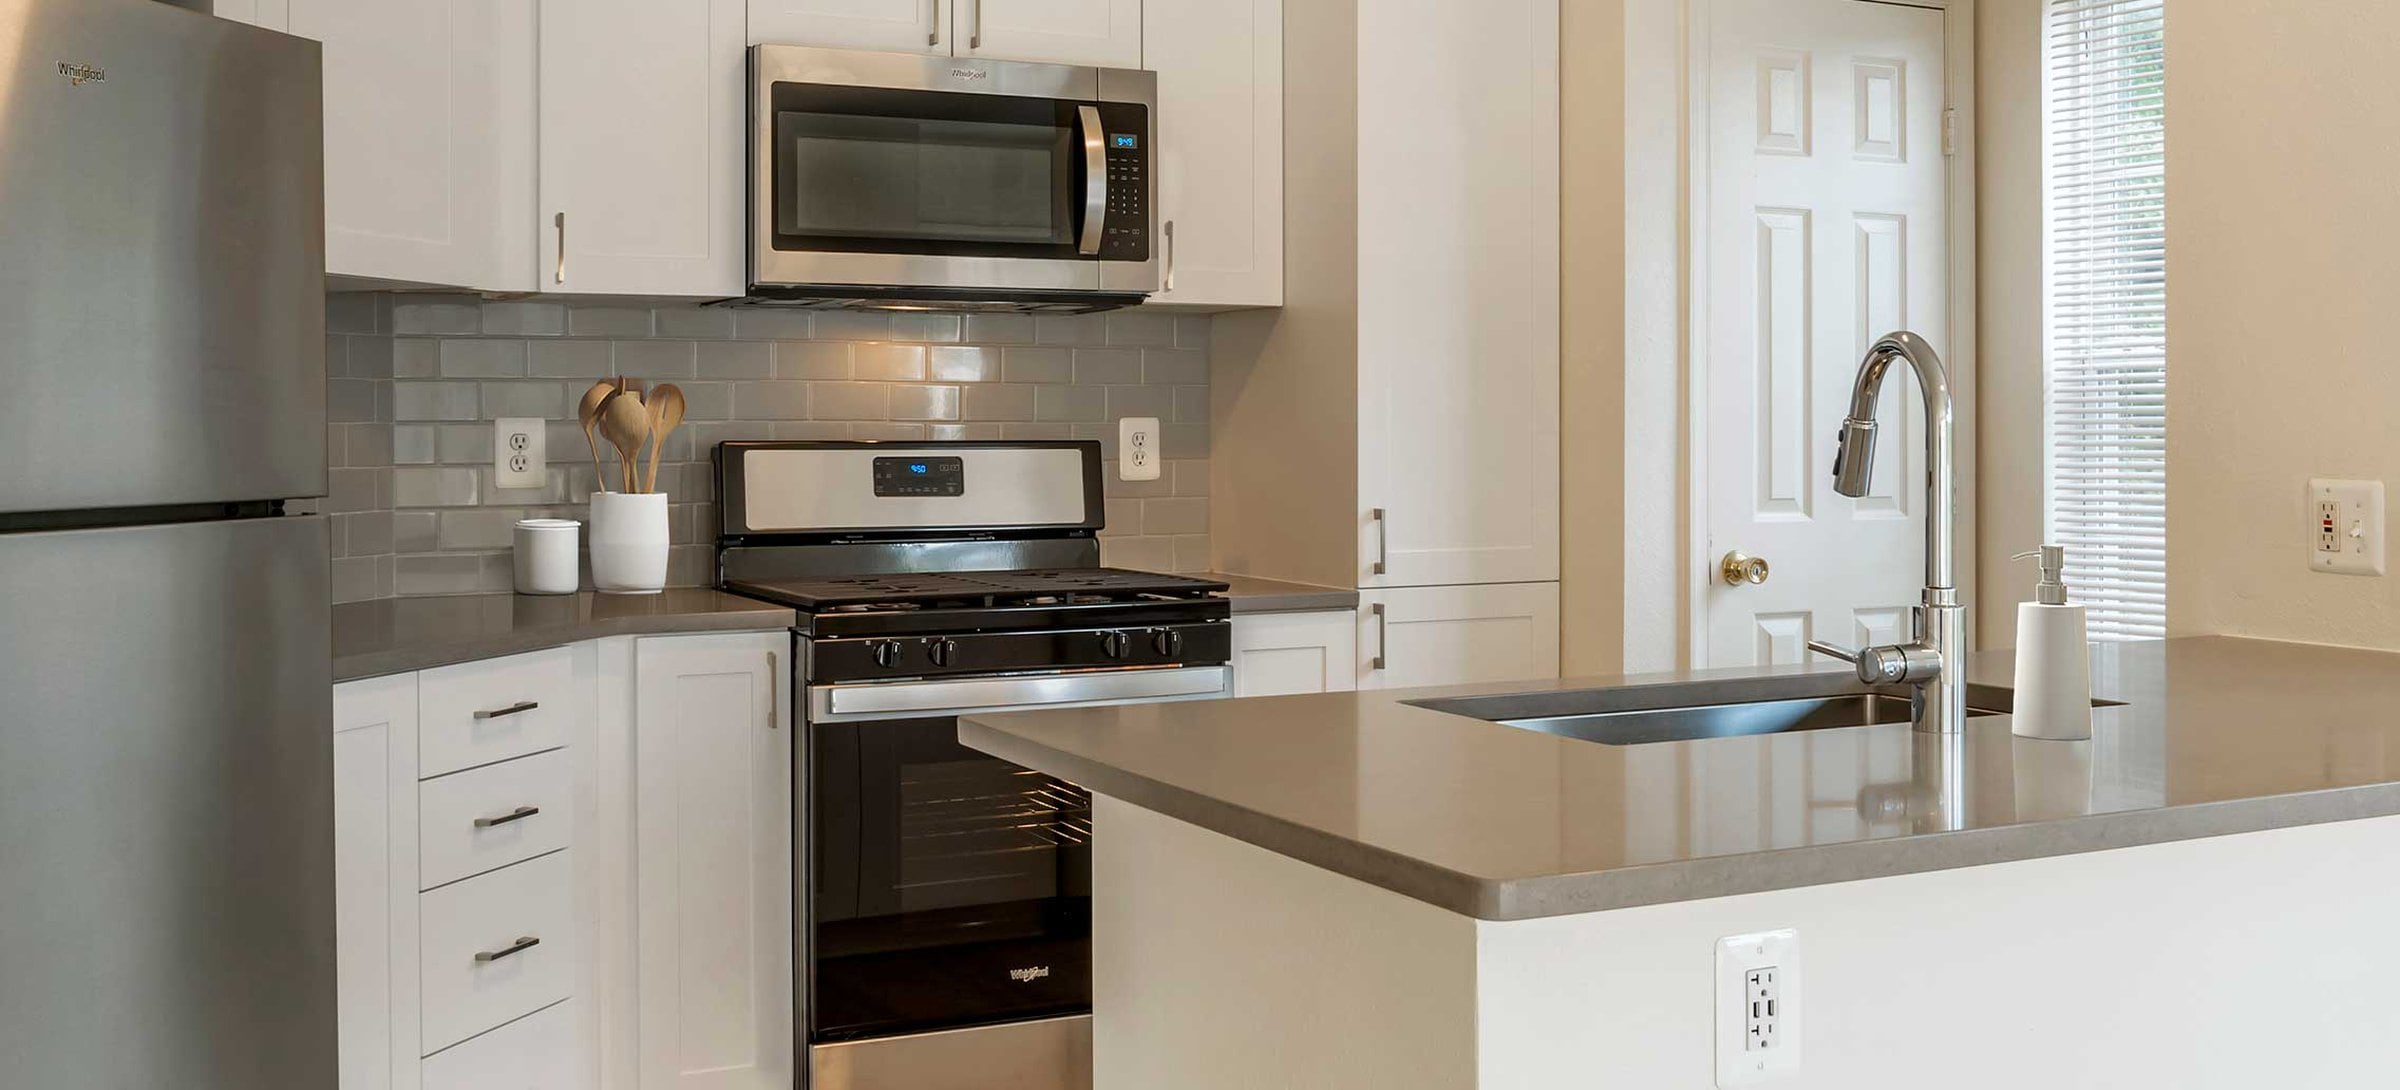 Newly renovated Finish Package V kitchens with white cabinetry, grey quartz countertops, stainless appliances, grey tile backsplash, and hard surface flooring